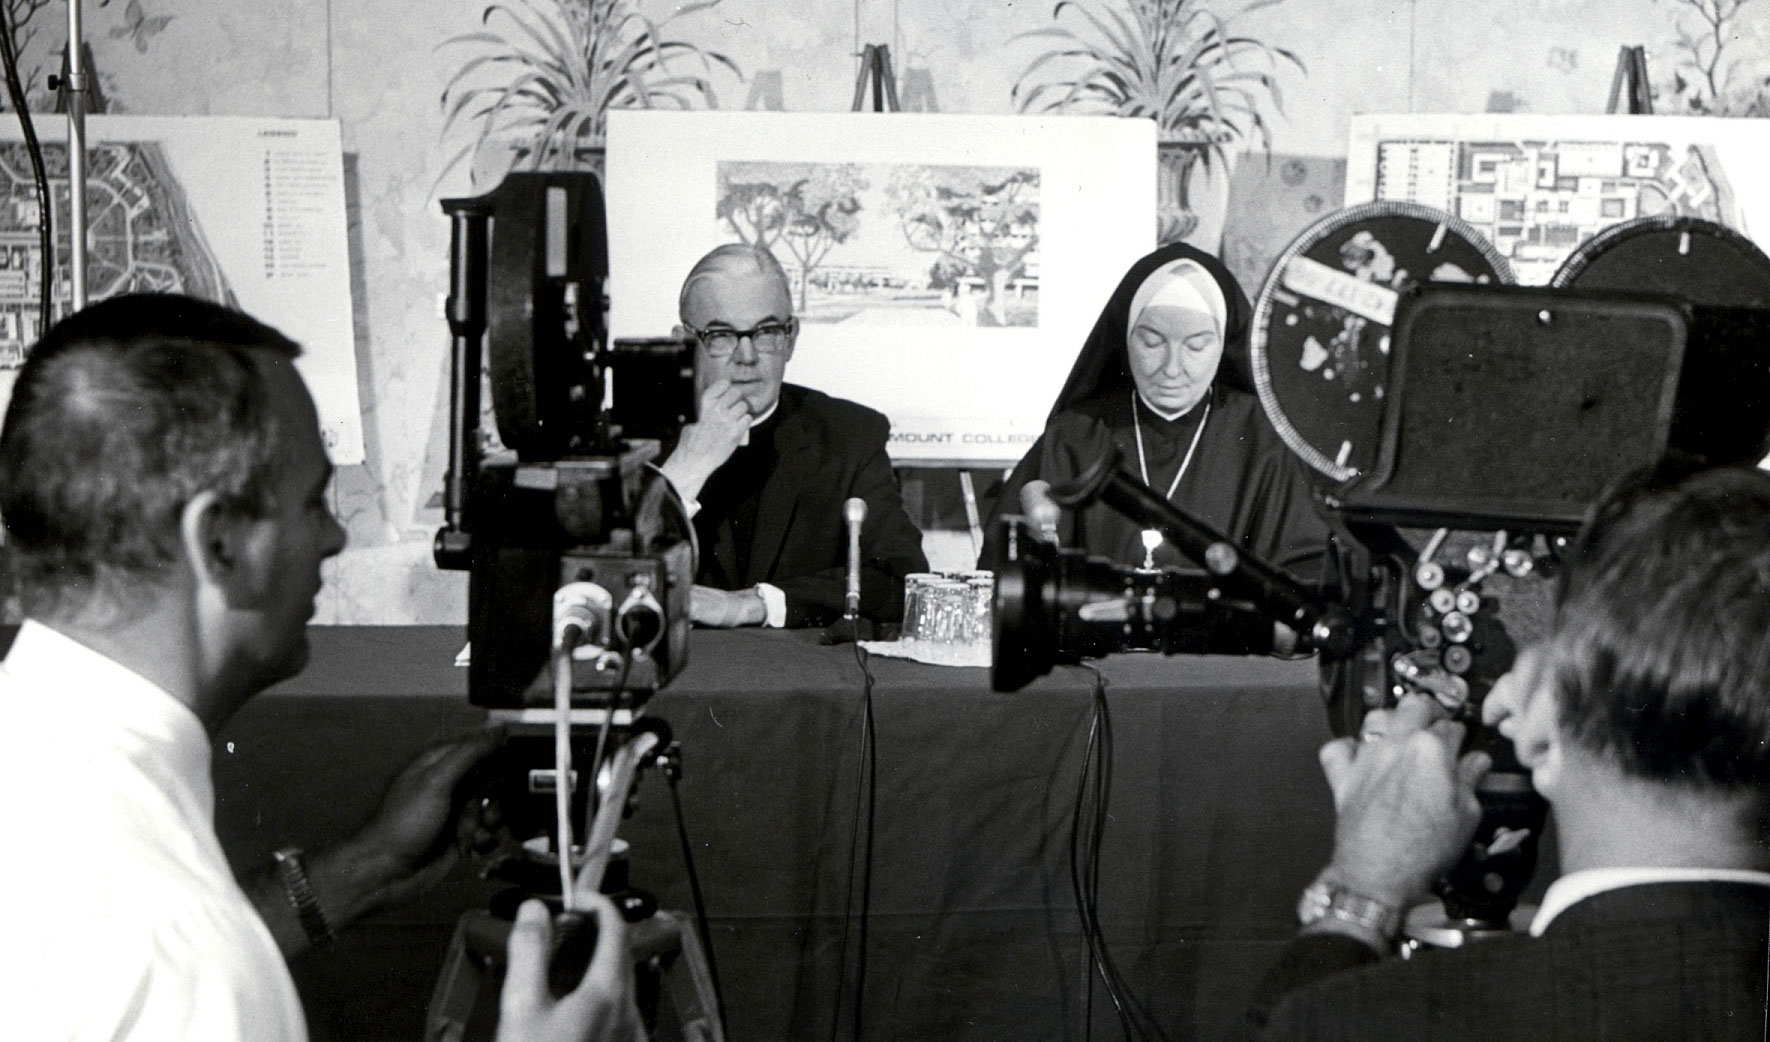 A vintage image of a press conference showing a priest and a nun at a table signing documents with a camera crew filming them